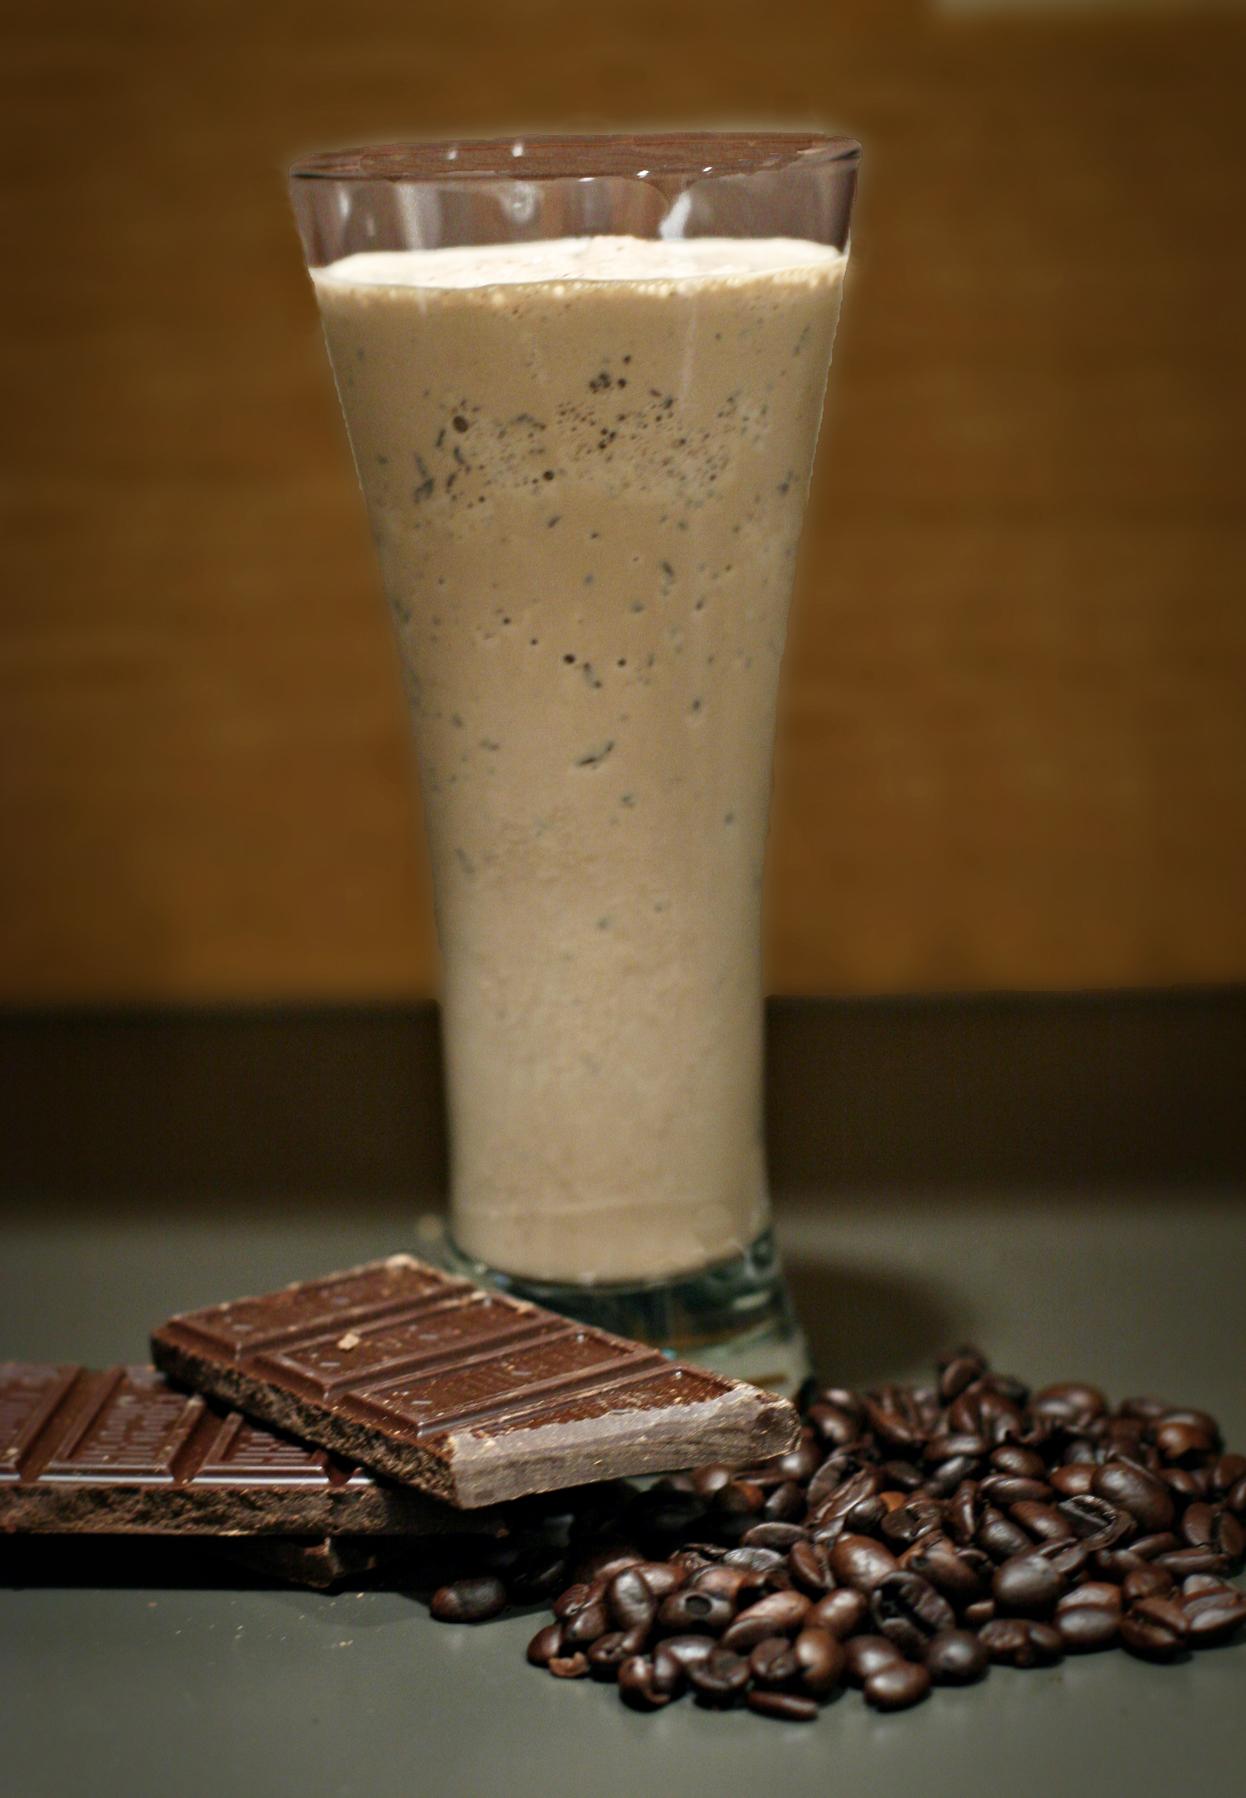  Take a break from the heat with our icy and creamy Mocha Frappe